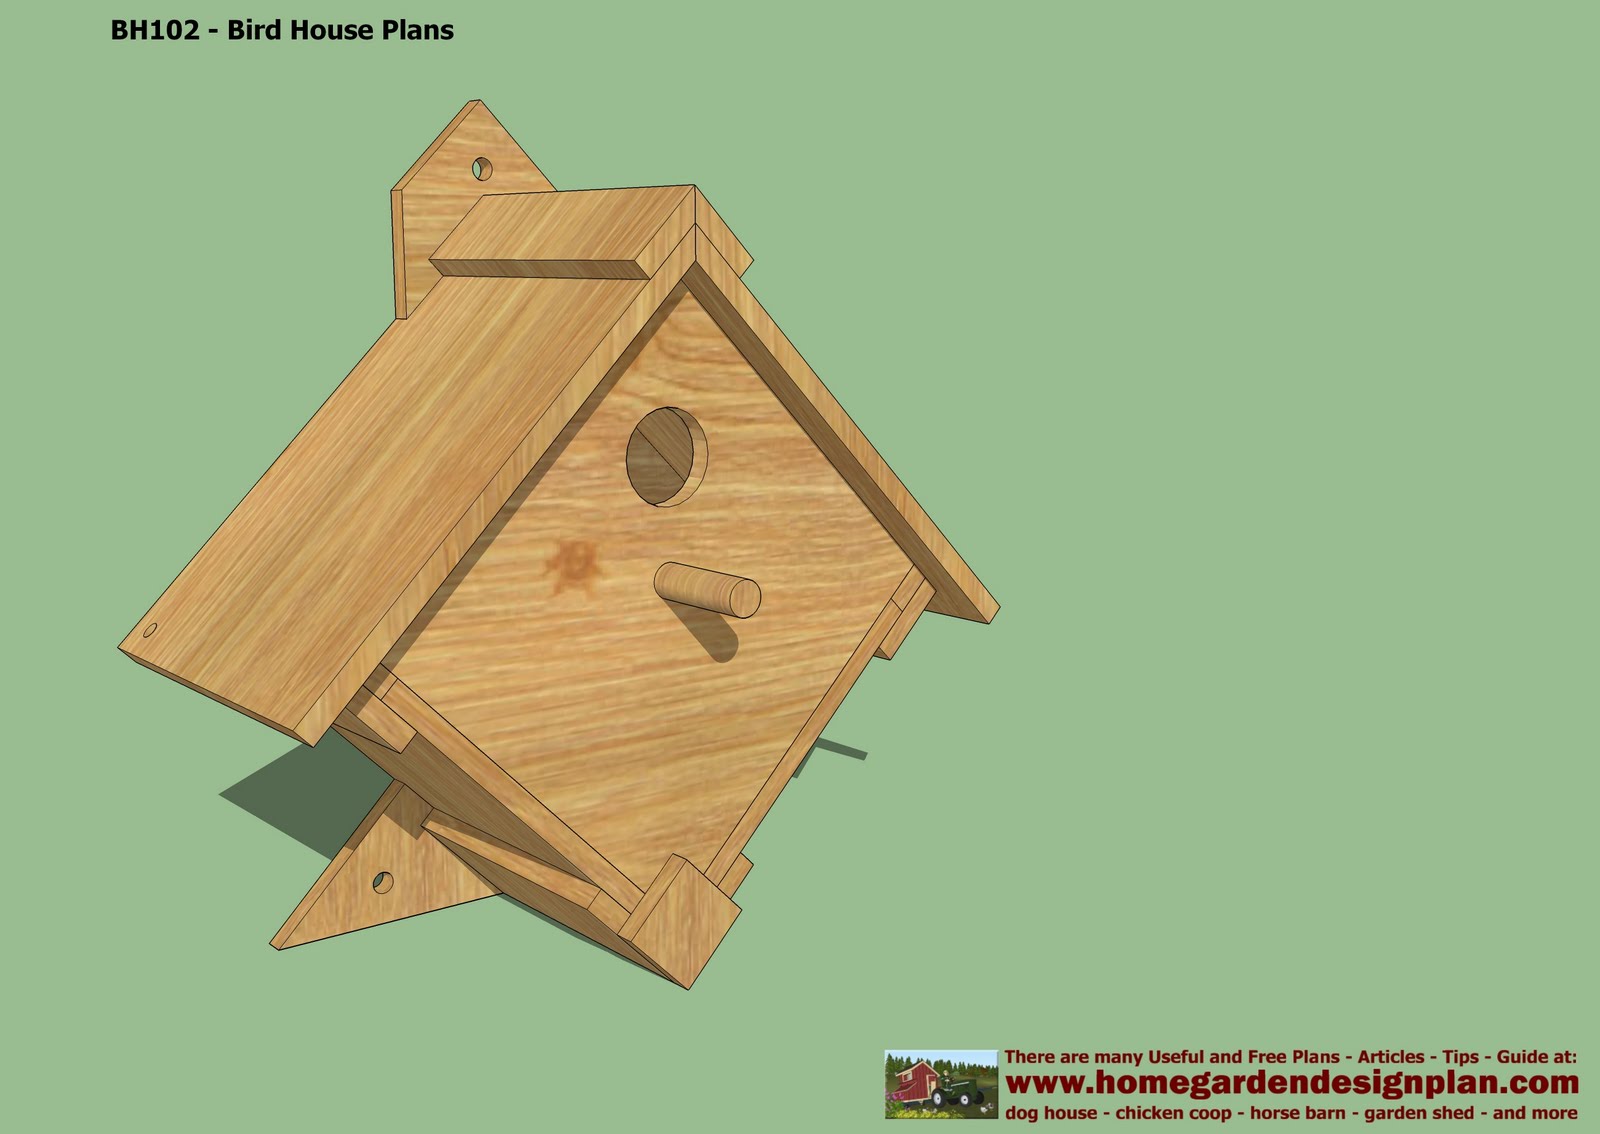  Bird House Plans Free moreover Simple Bird House Plans as well